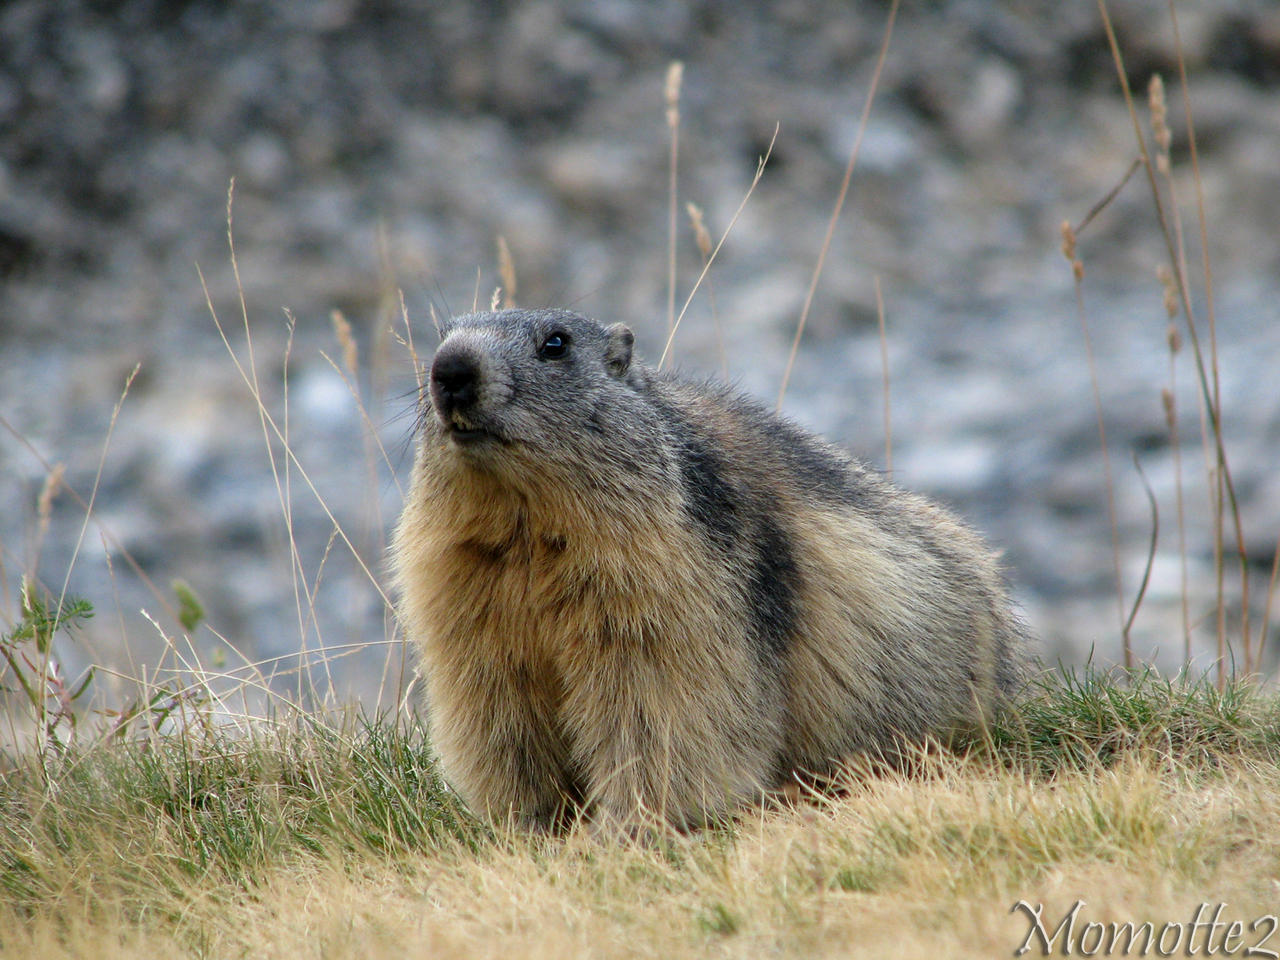 Warm wishes from a marmot